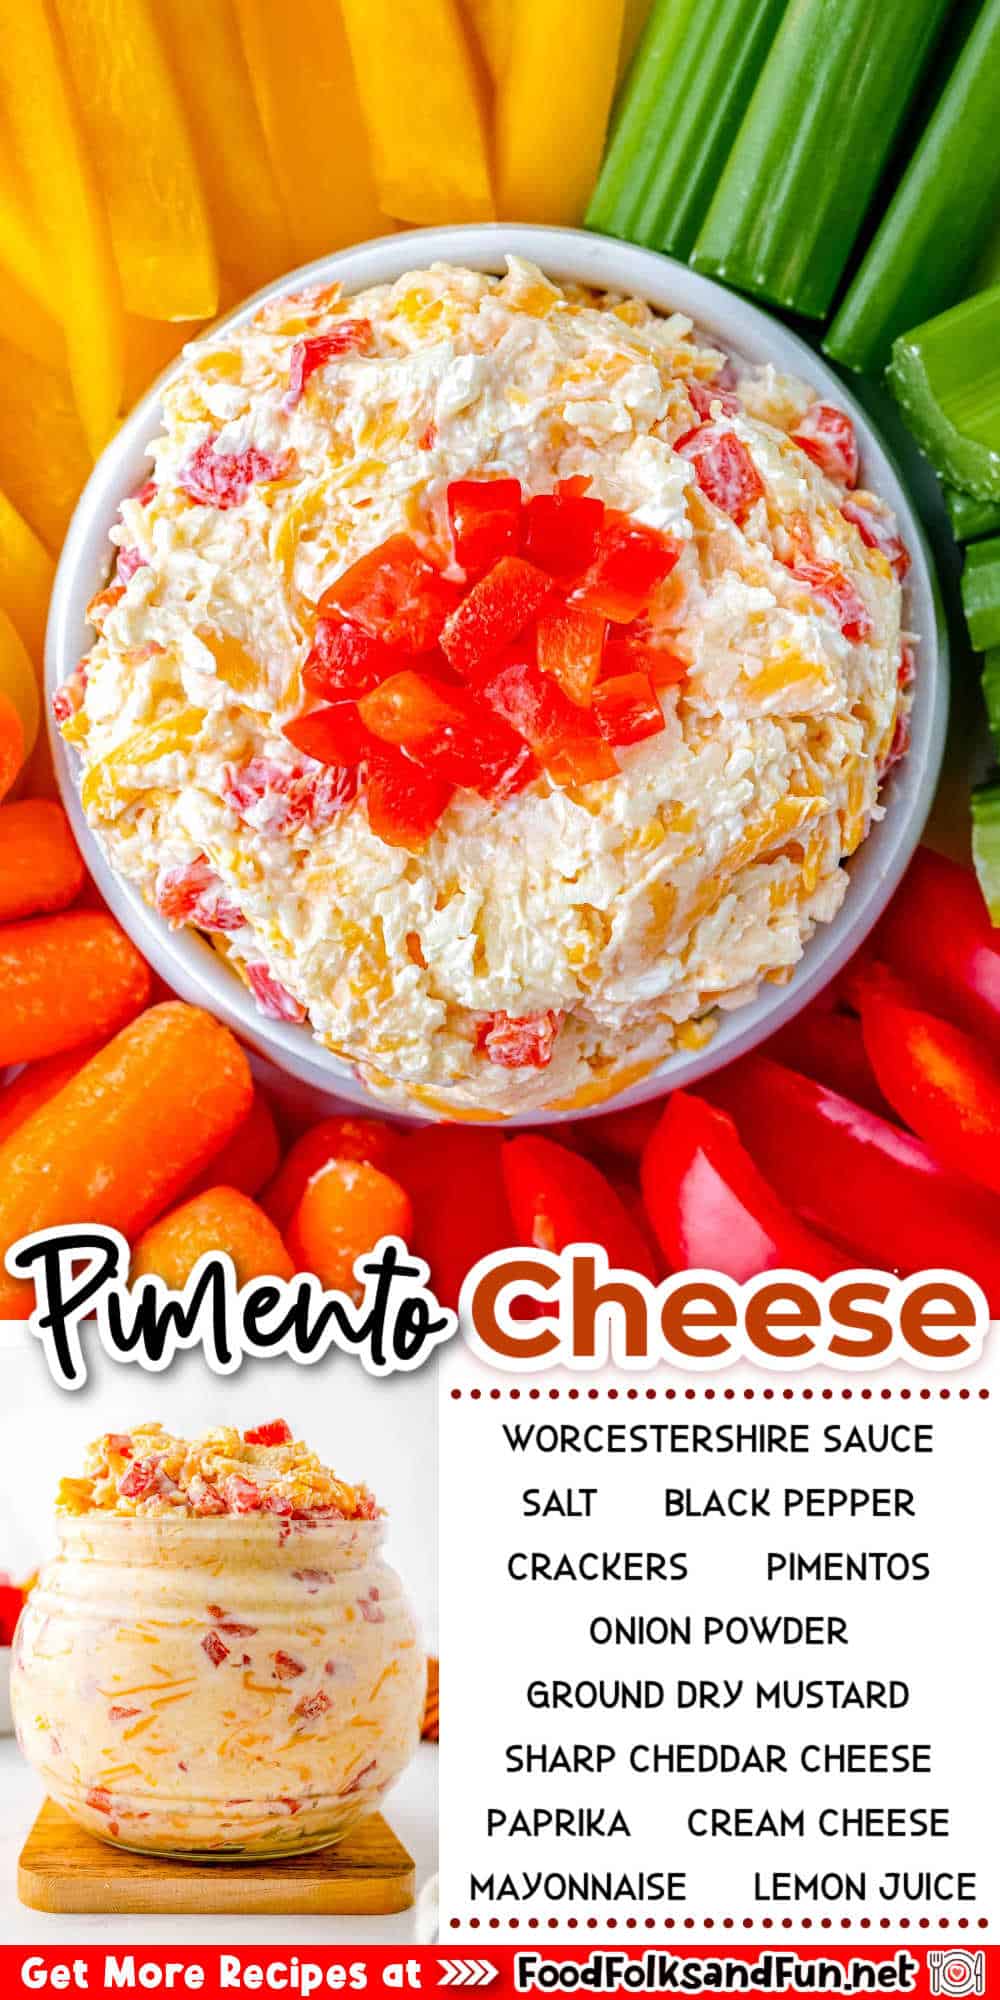 Enjoy the ultimate Southern classic, Pimento Cheese, with buttery crackers or veggie sticks. Simple, portable, and a family favorite for snacking! via @foodfolksandfun